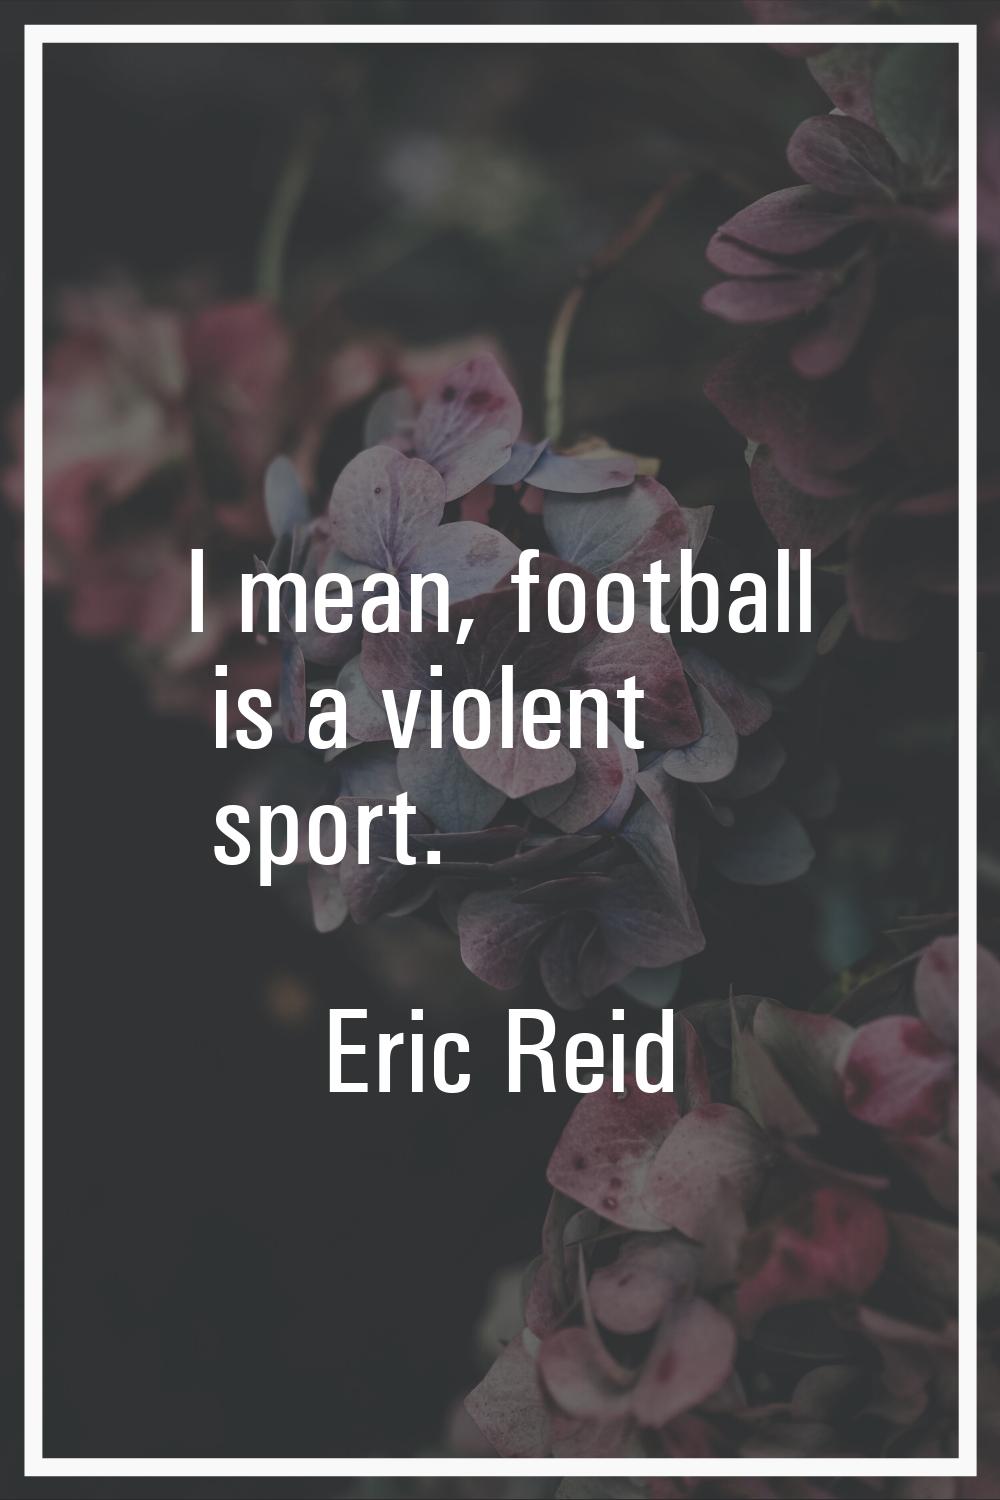 I mean, football is a violent sport.